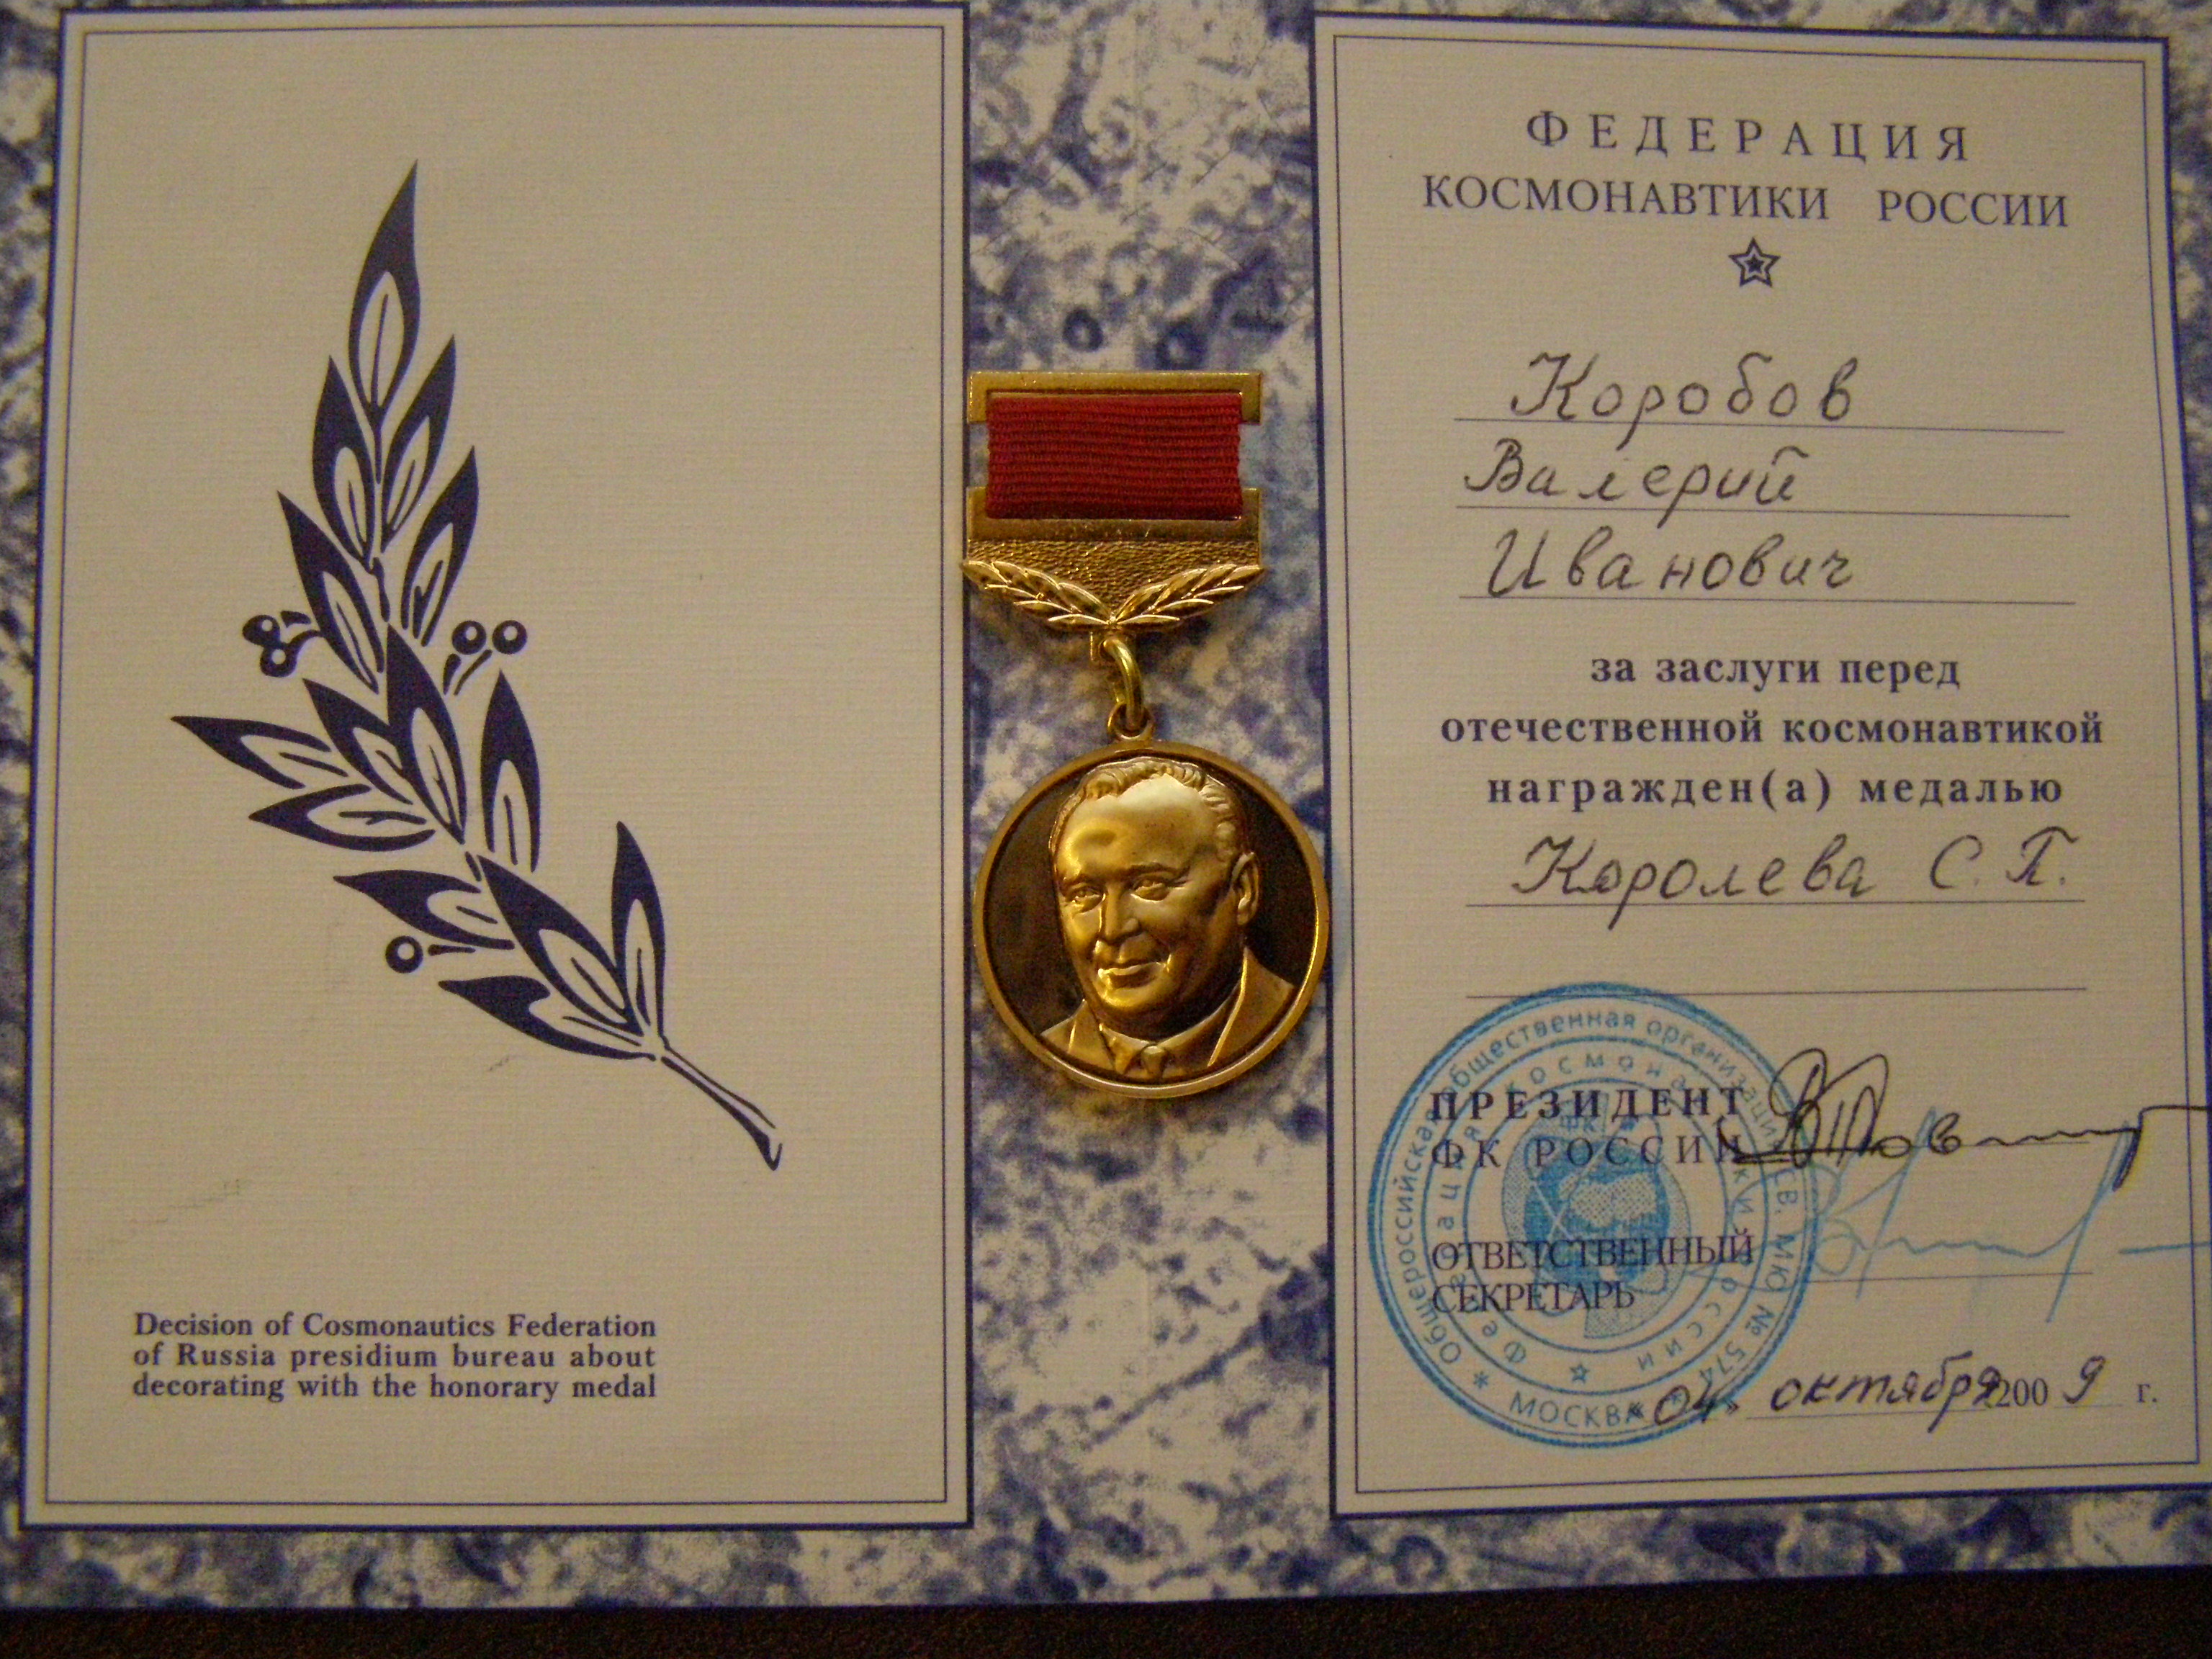 Medal of Korolev of the Russian Cosmonautics Federation